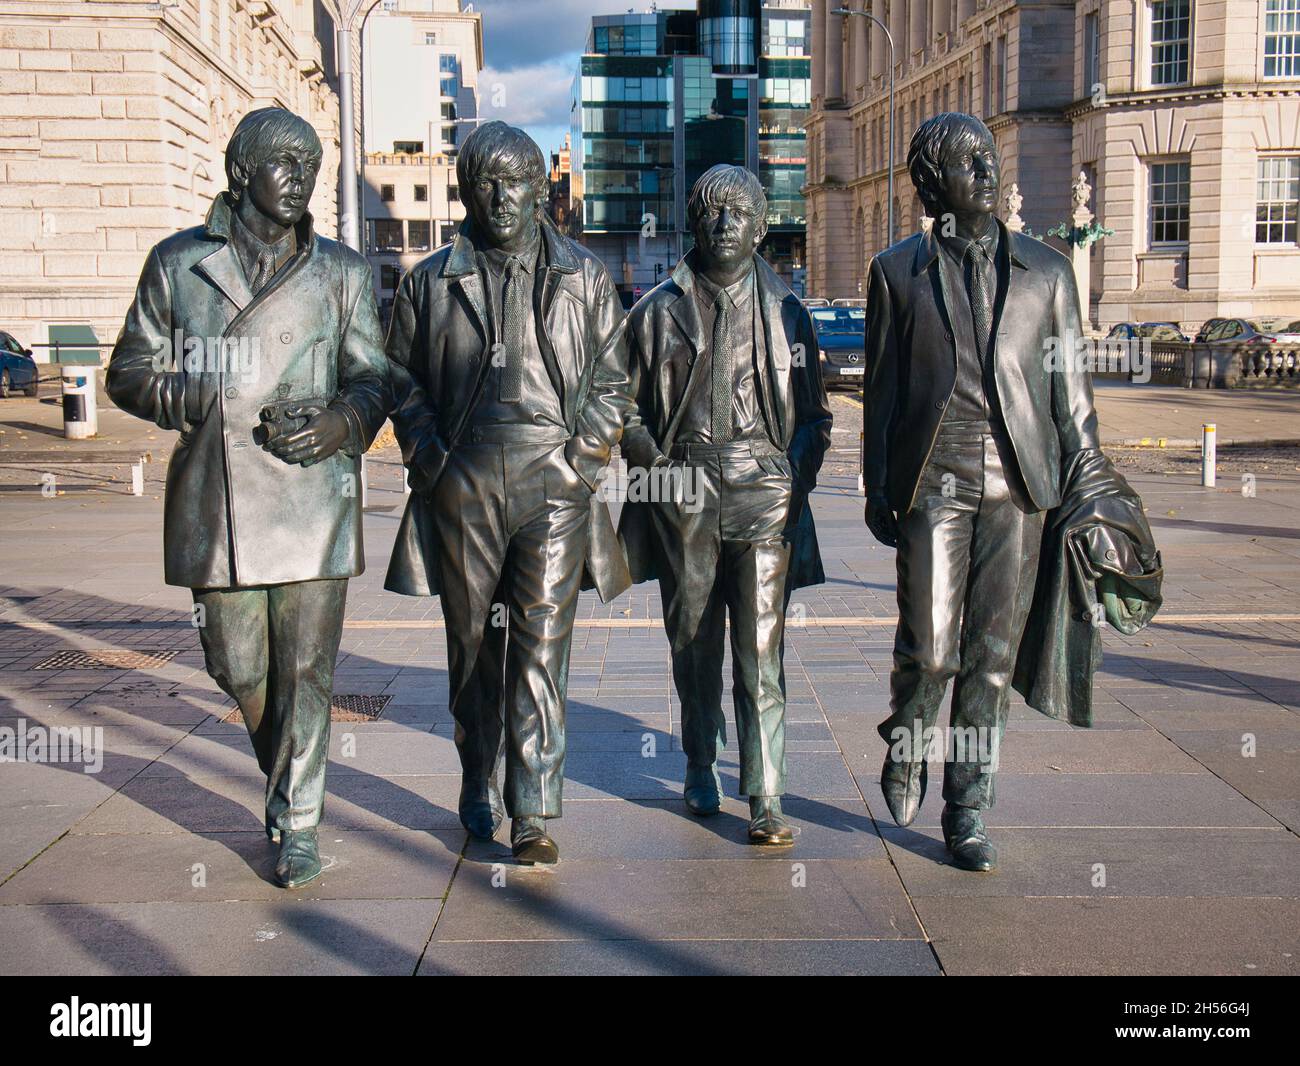 An iconic statue of The Beatles in their home town of Liverpool - located on the Pier Head on the River Mersey waterfront. Sculpted by Andrew Edwards Stock Photo